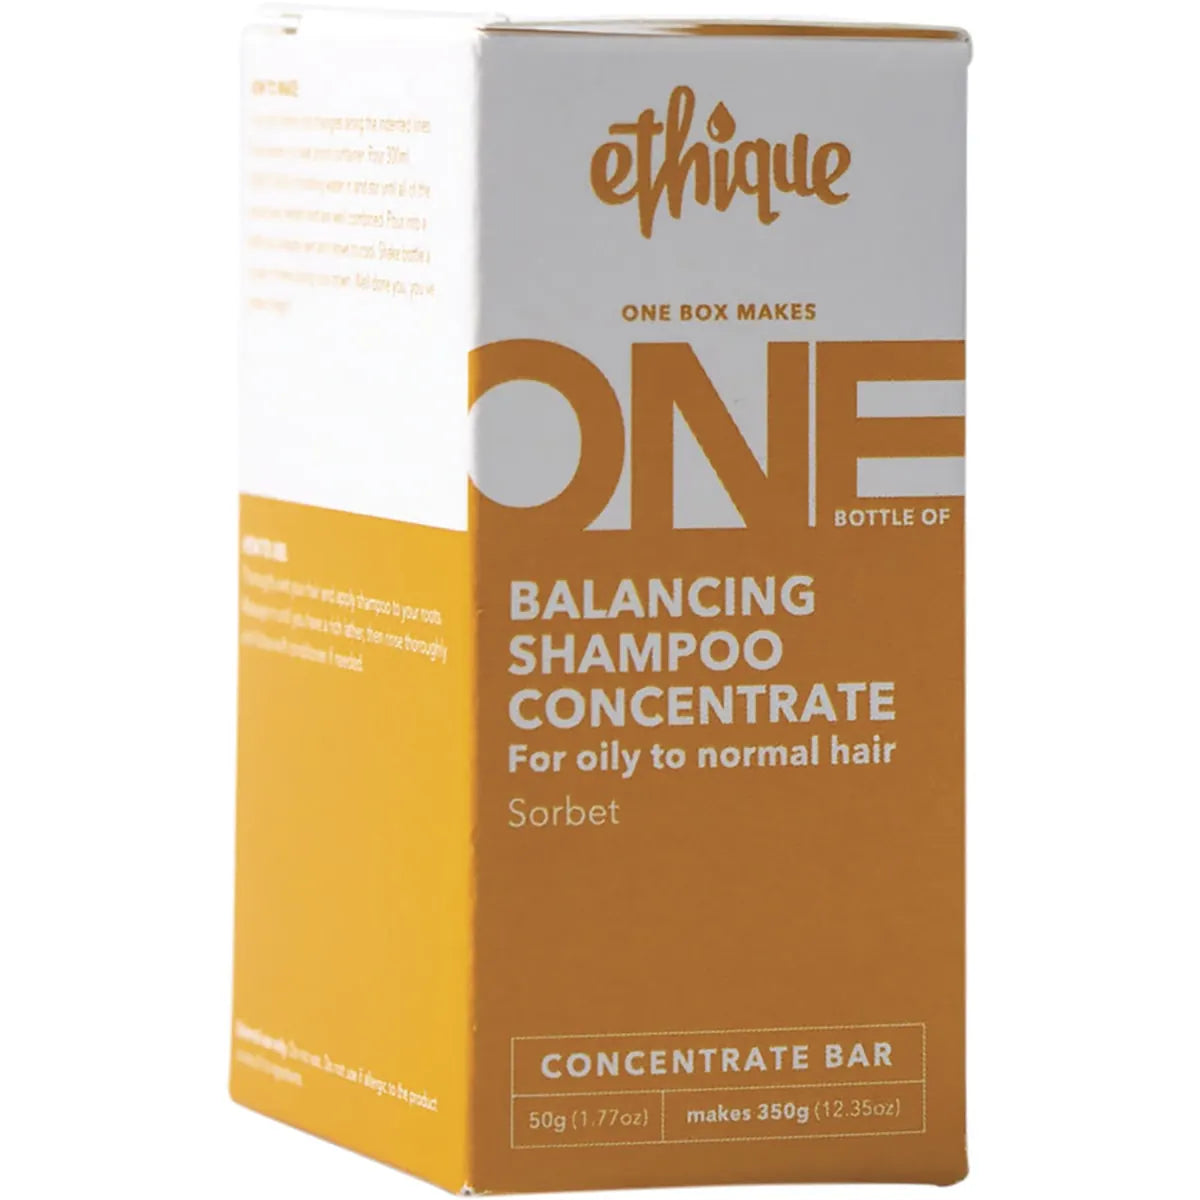 Ethique Balancing Shampoo Concentrate For Oily to Normal Hair